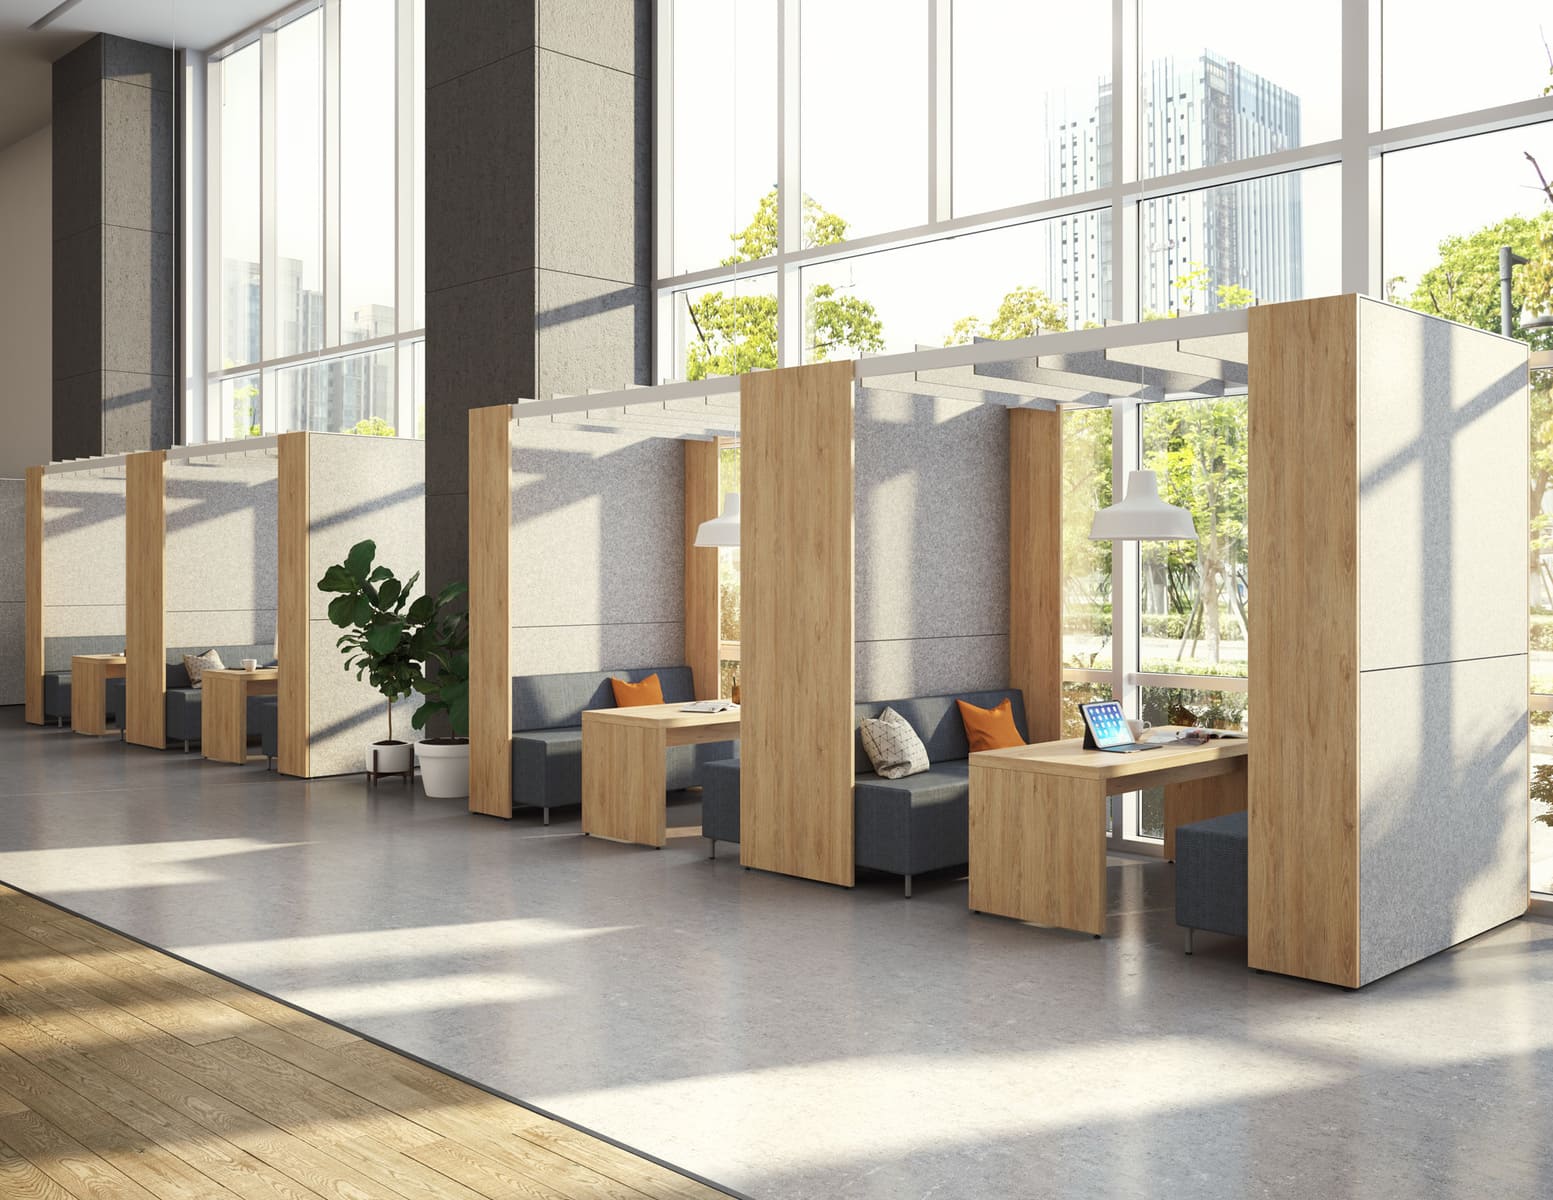 Semi Private Meeting Booths for Open Plan workplaces